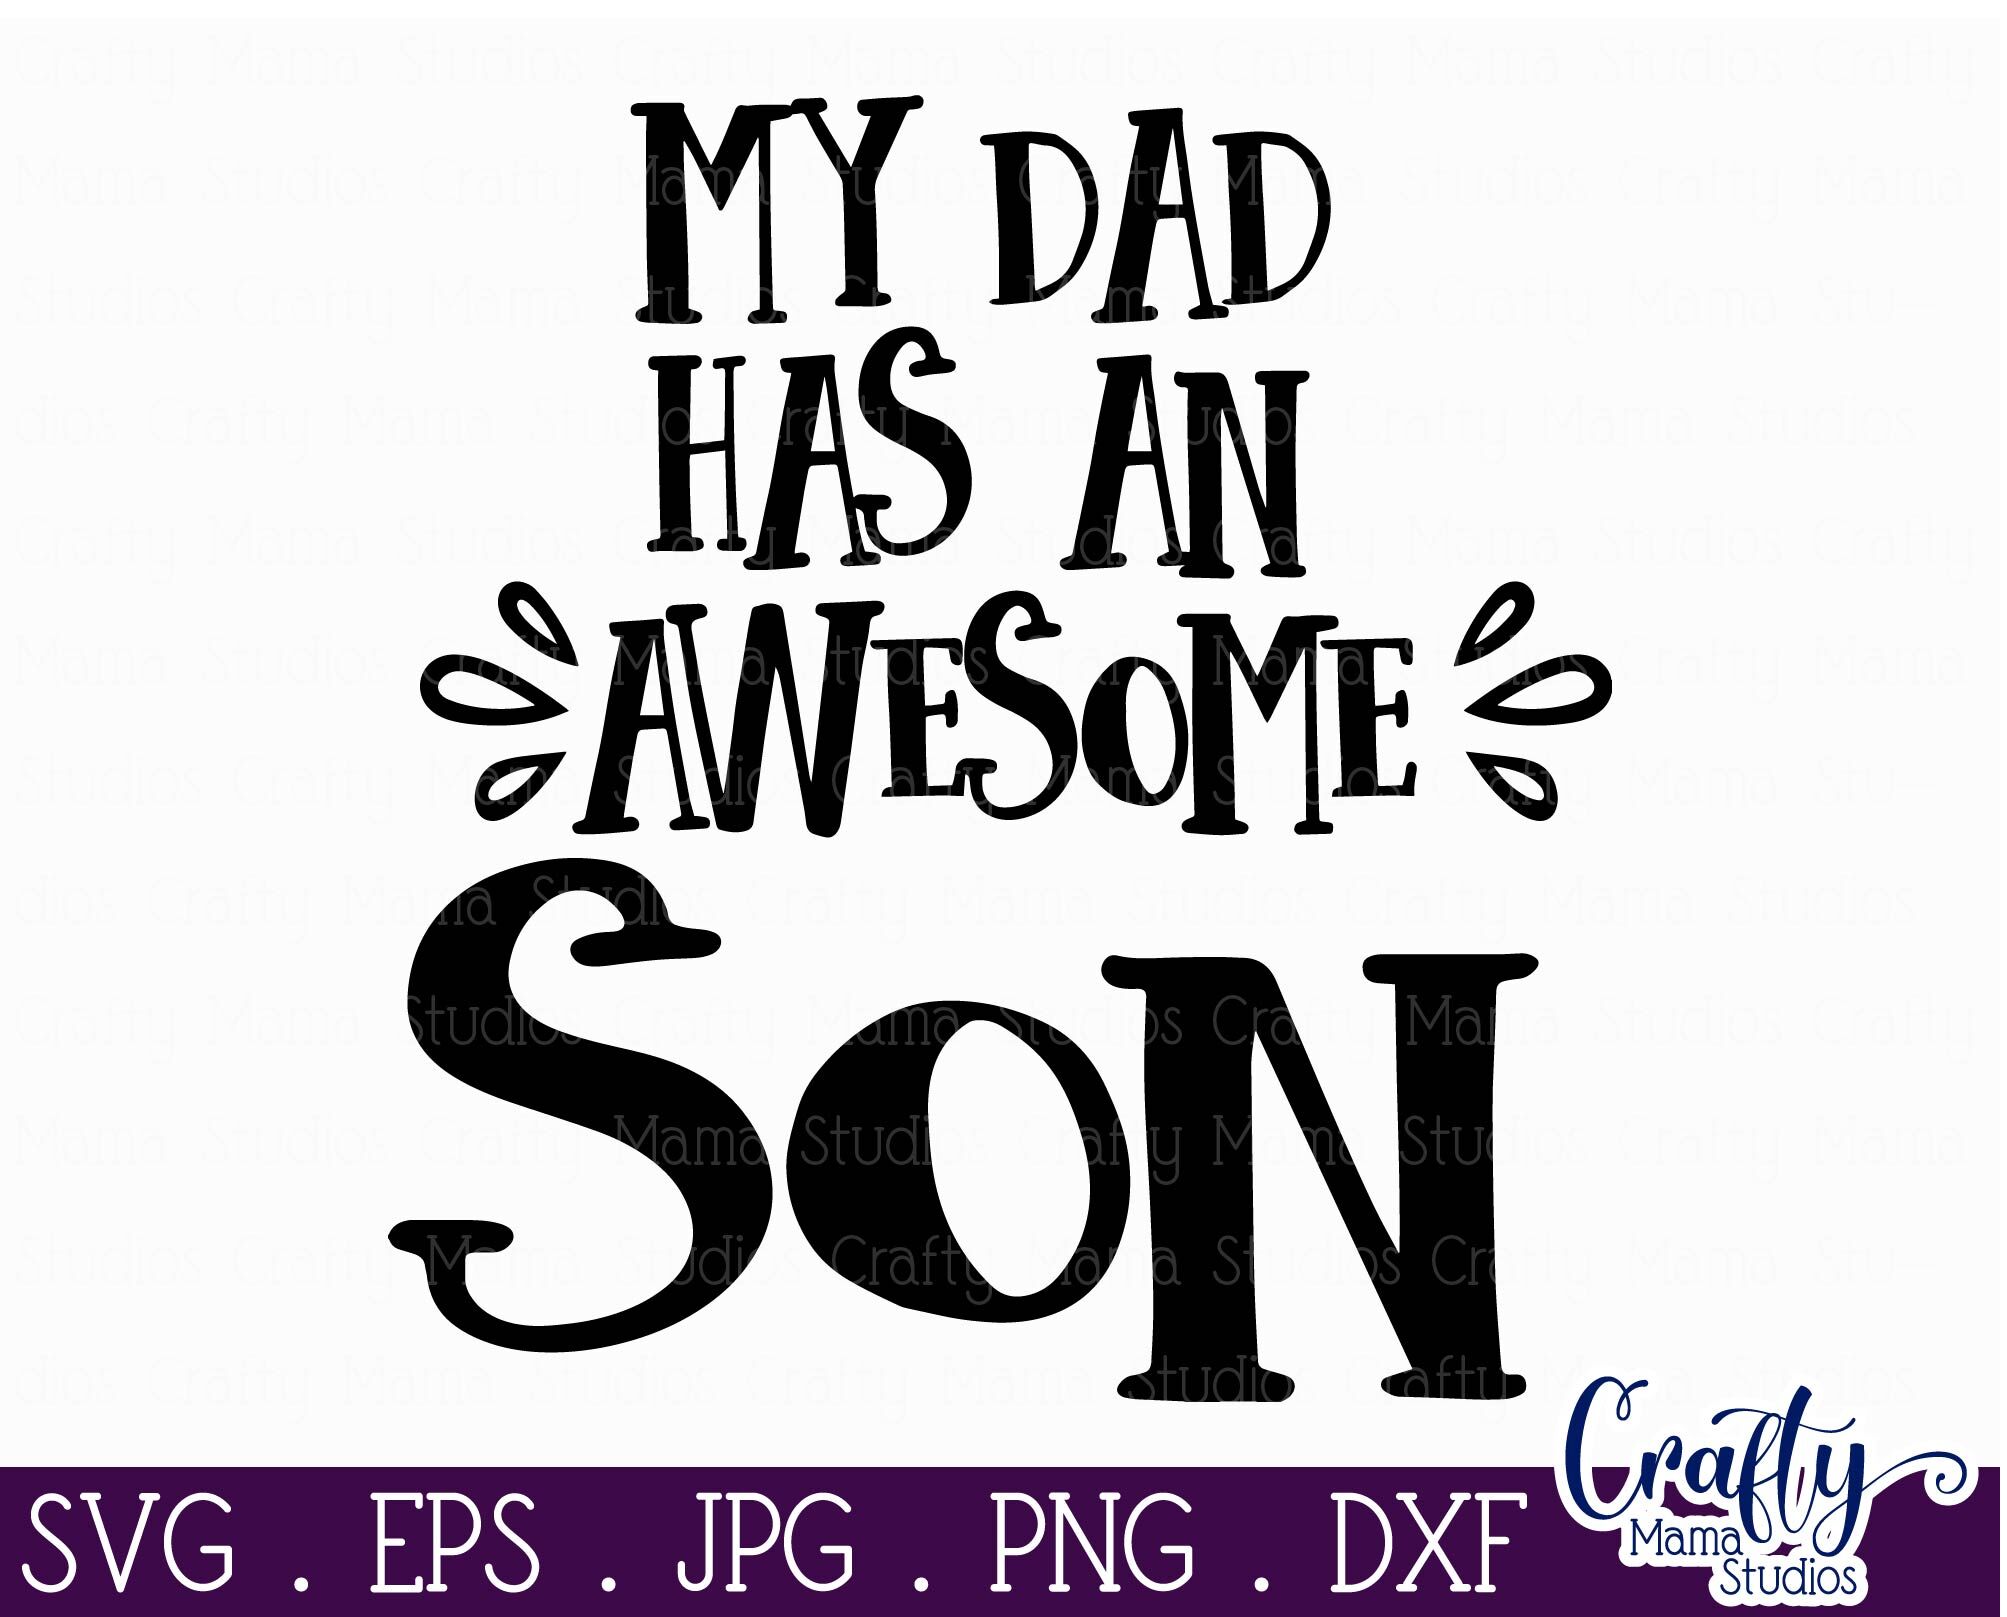 Download My Dad Has An Awesome Son Svg Baby Boy Svg Son Svg By Crafty Mama Studios Thehungryjpeg Com